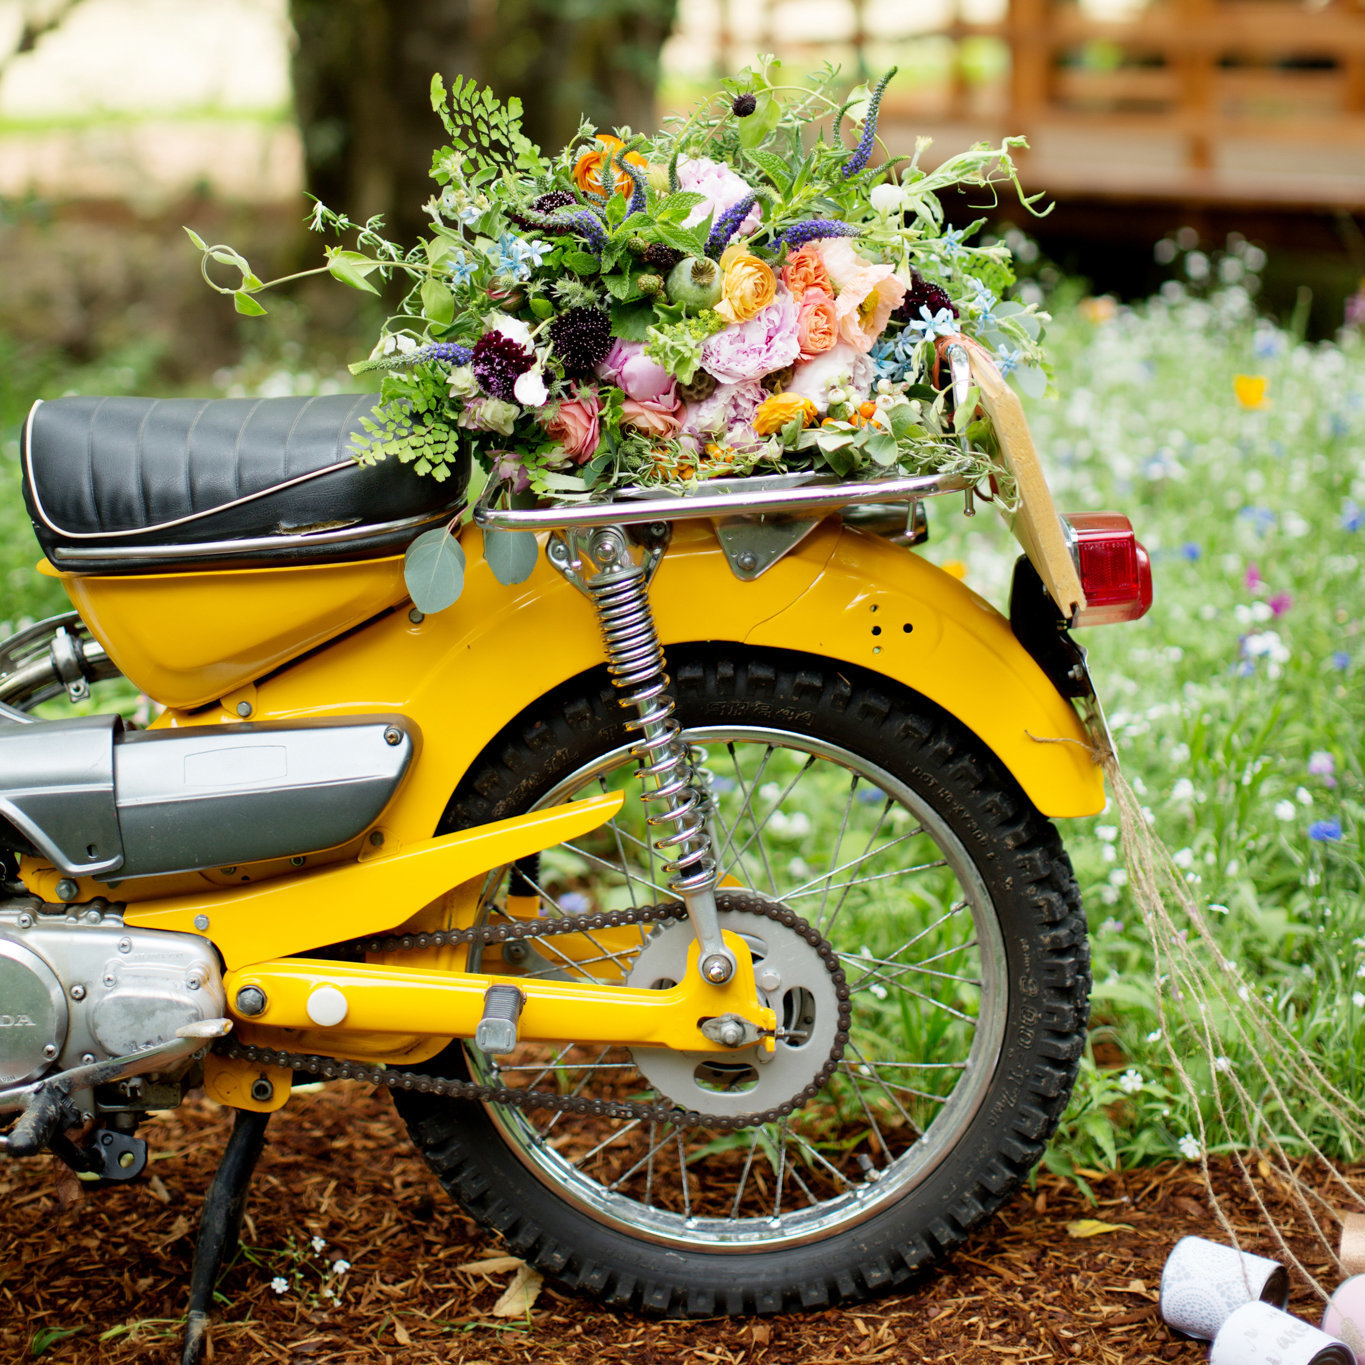 a pretty wildflower bouquet sits atop a bright yellow motorcycle that has just married cans tied to the back